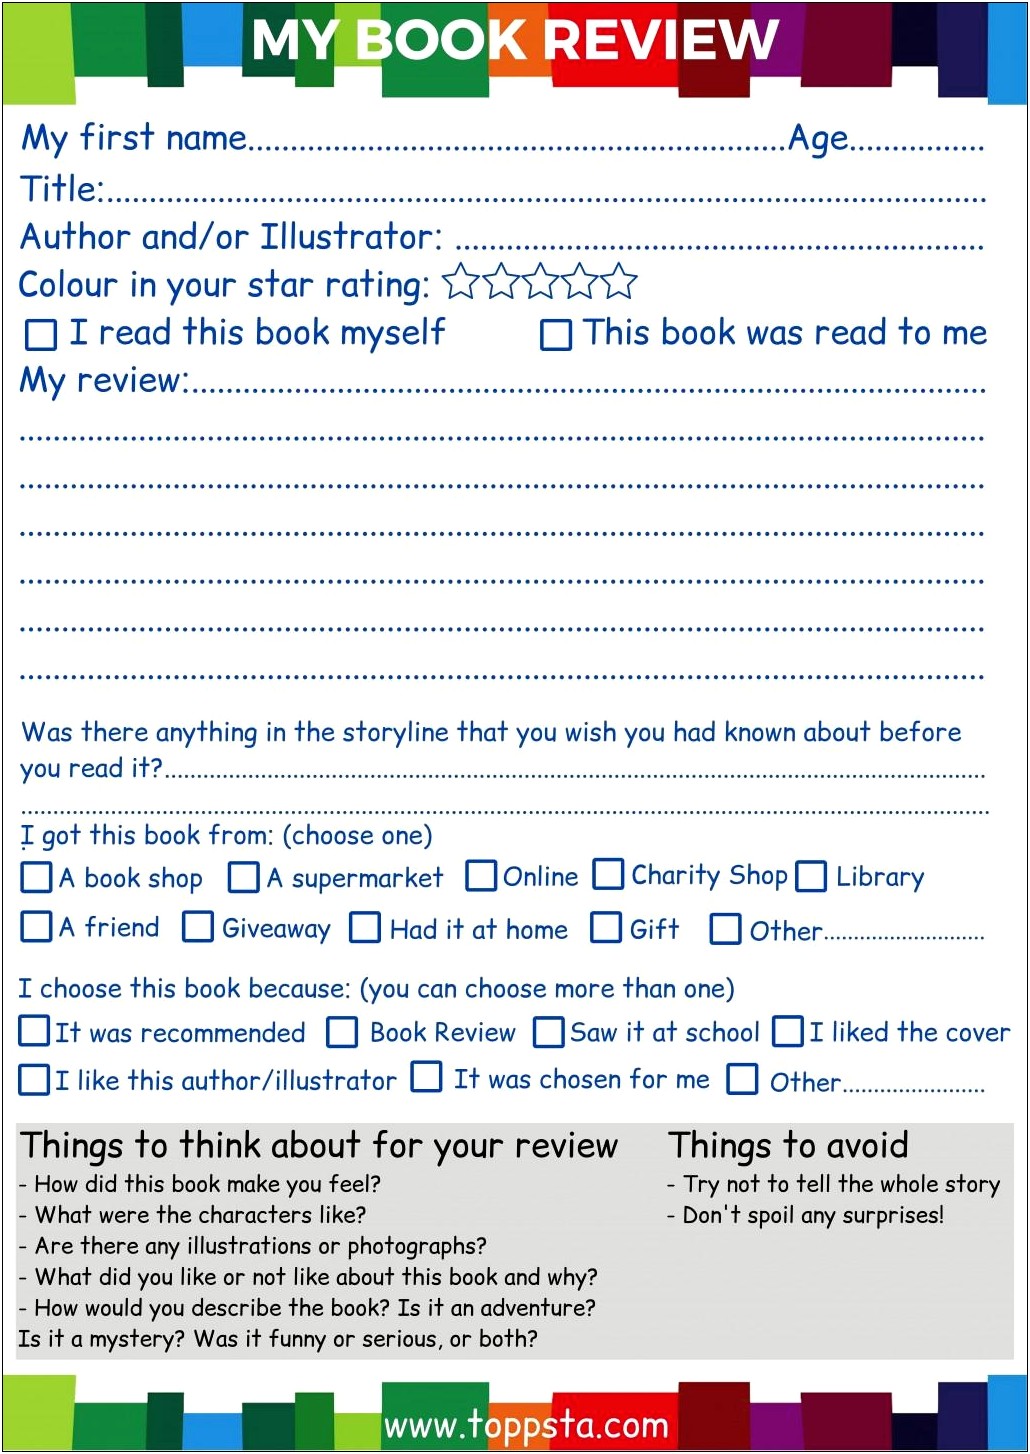 care-sight-review-report-template-free-printable-templates-resume